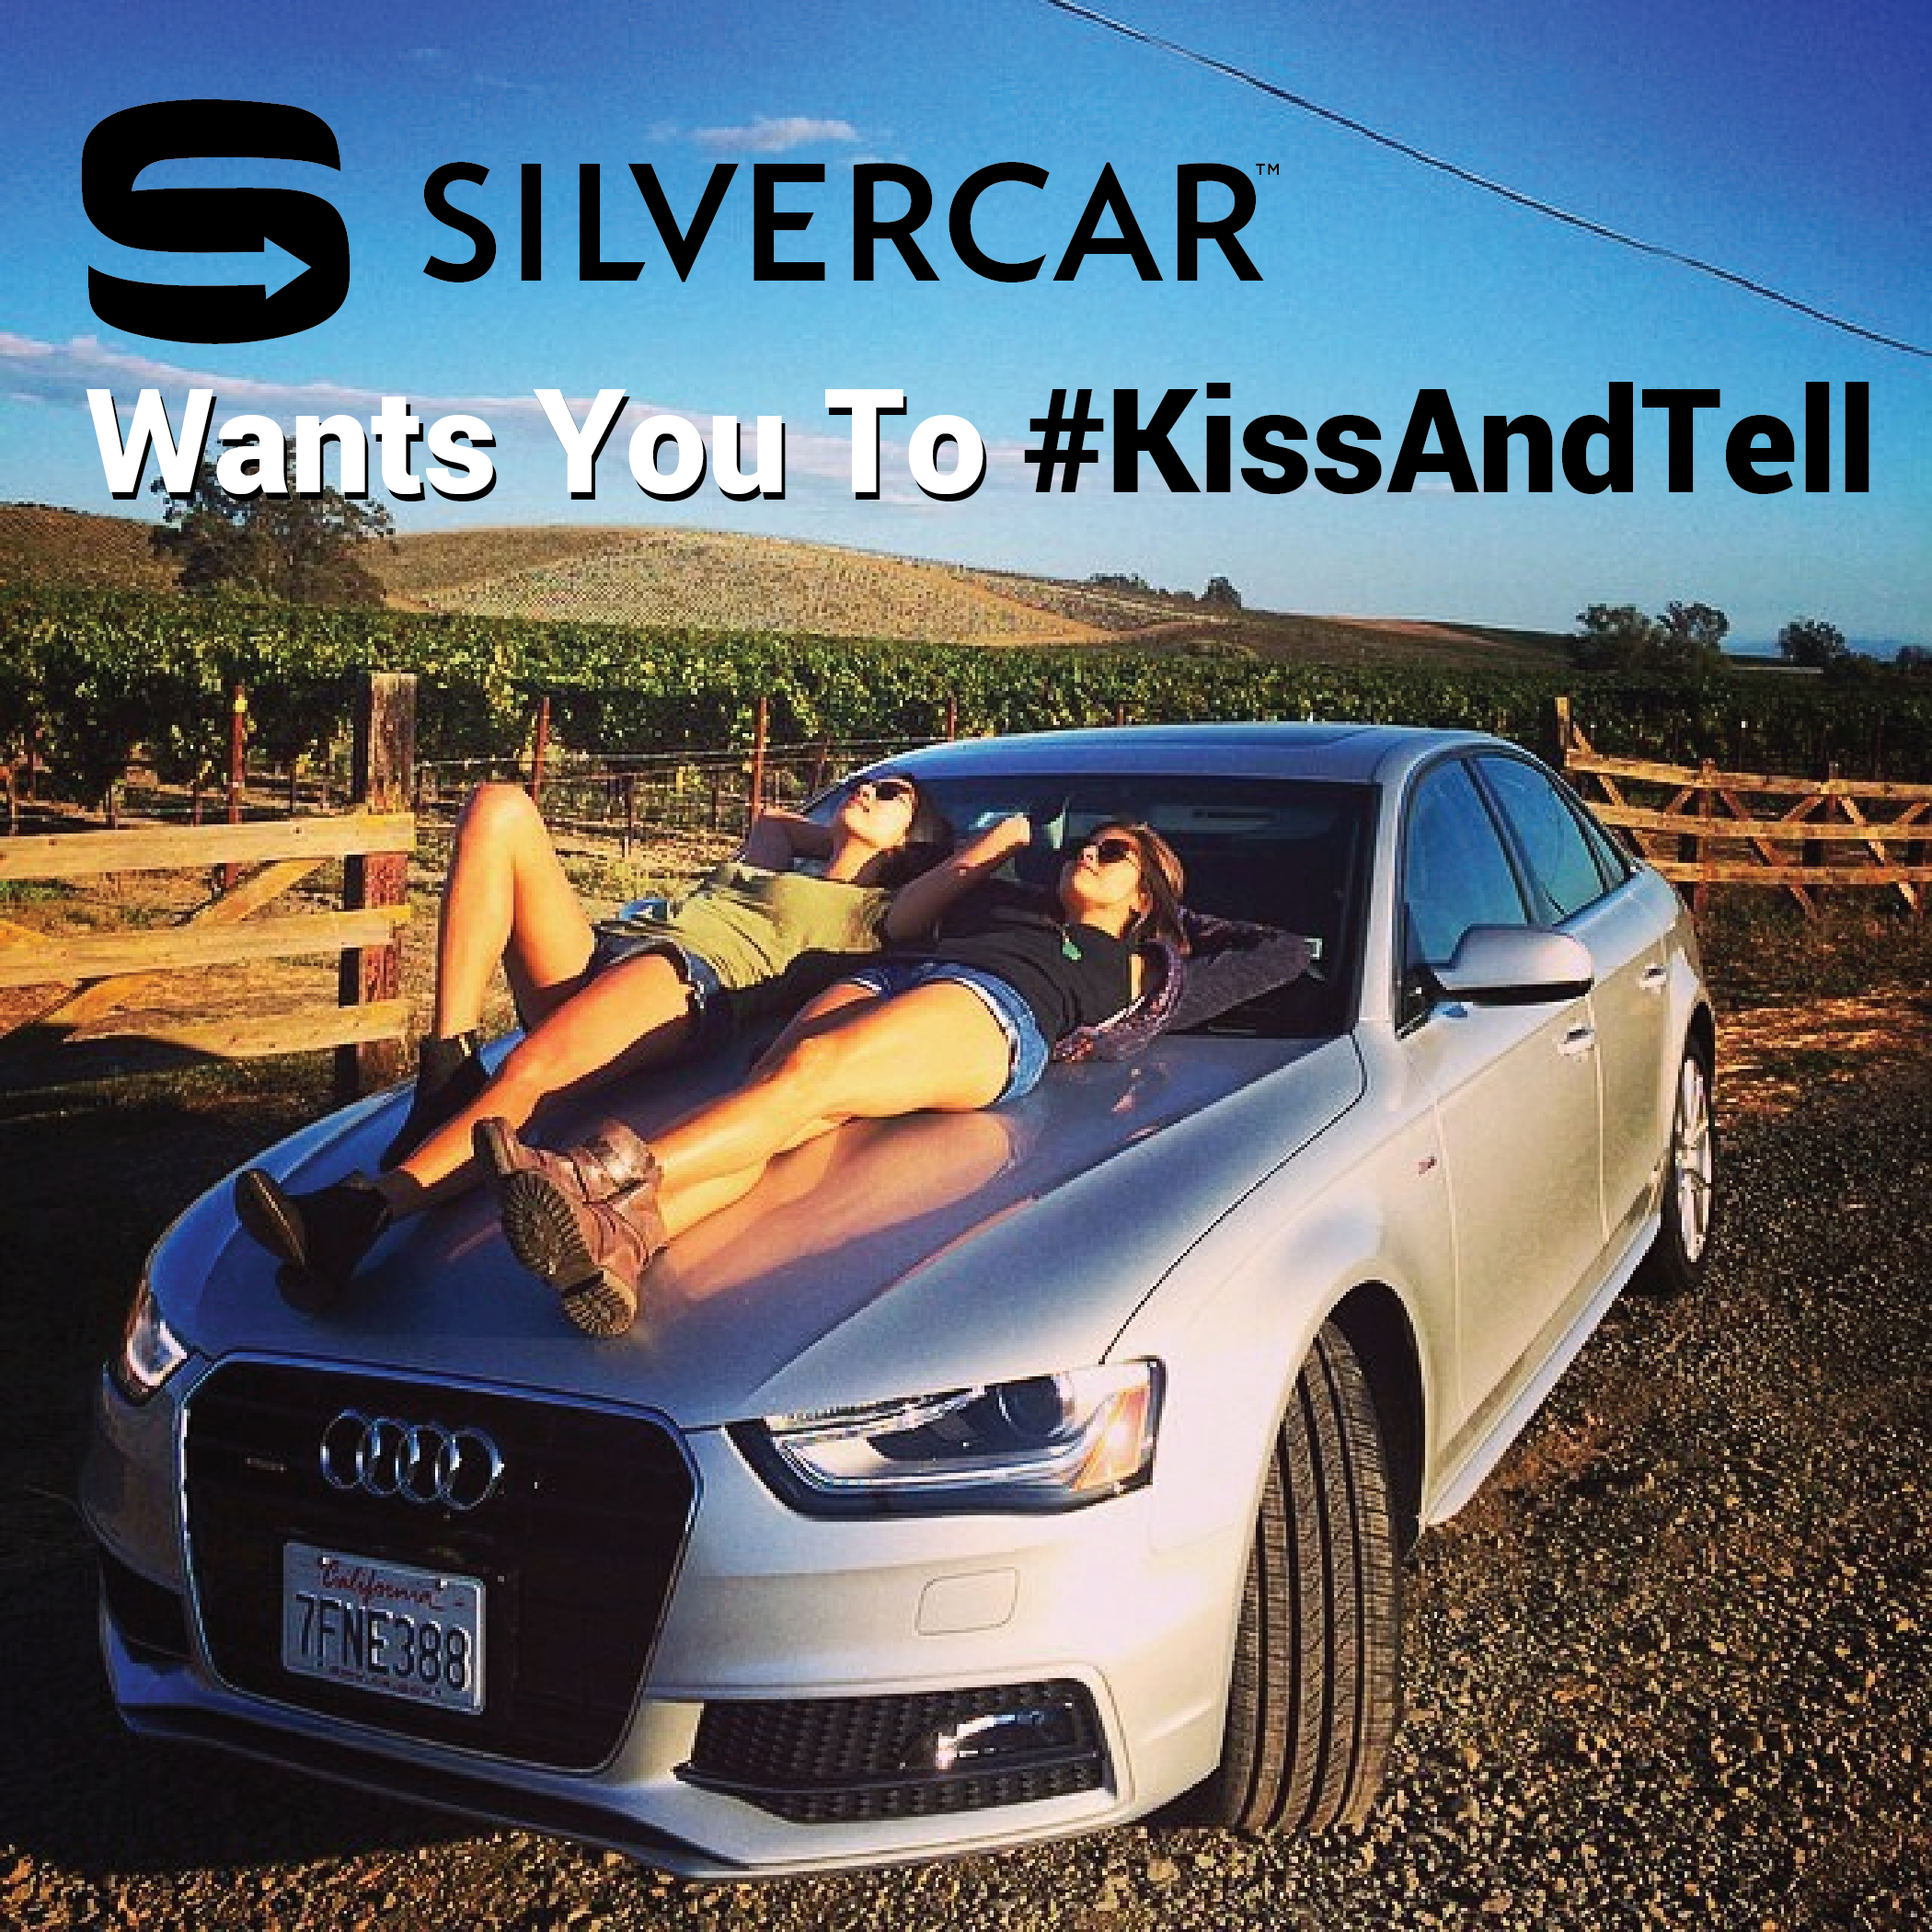 Silvercar launches #KissAndTell This February